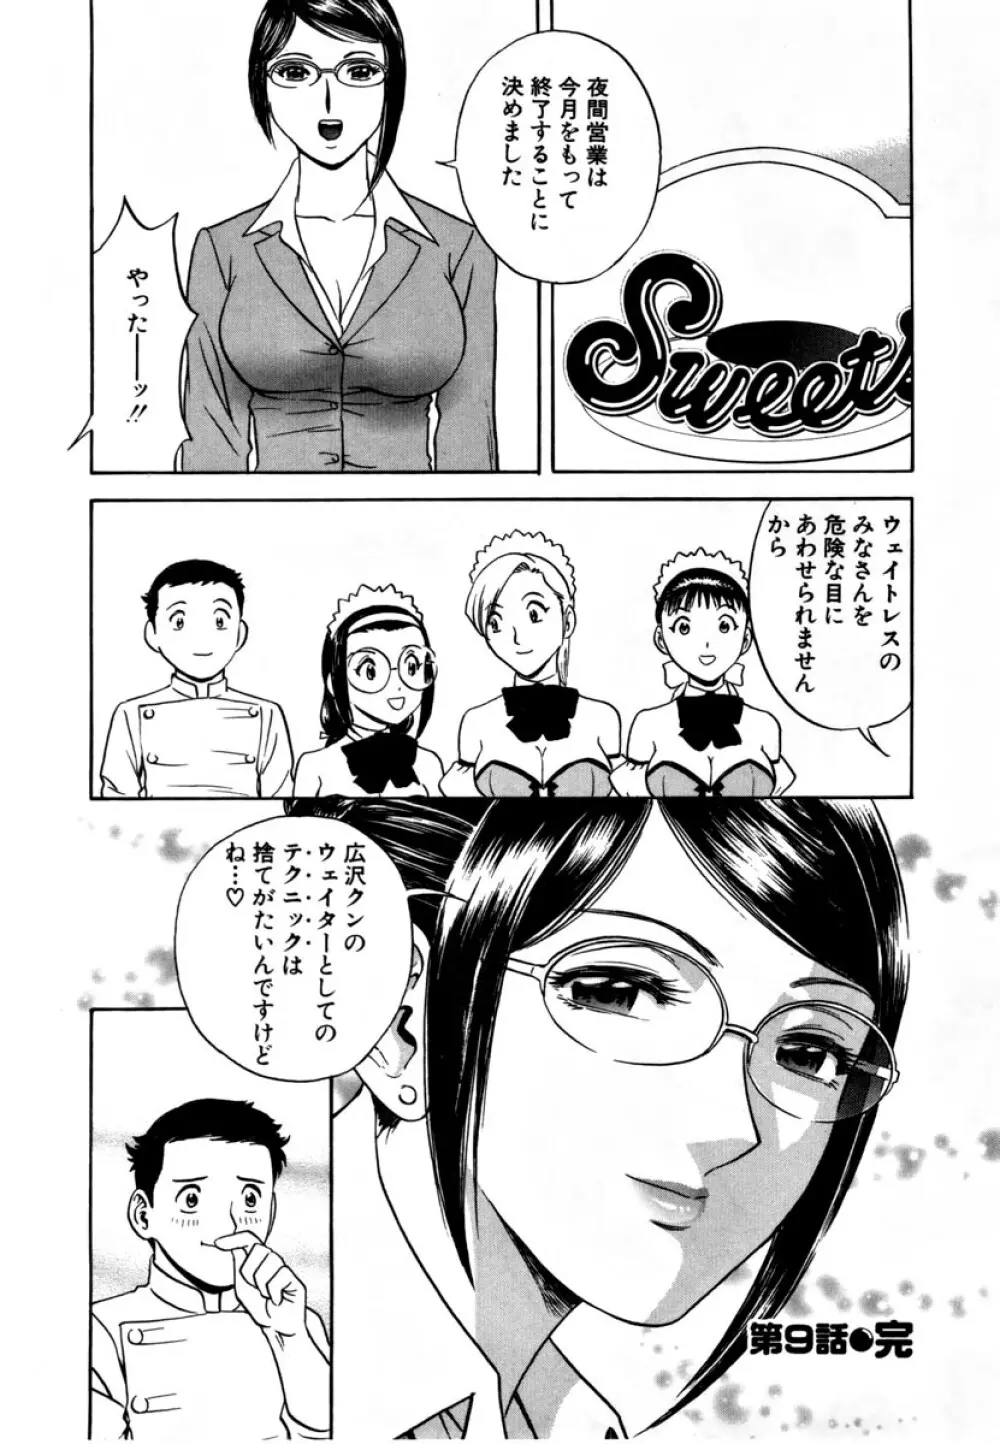 Sweets - 甘い果実 01 Page.189